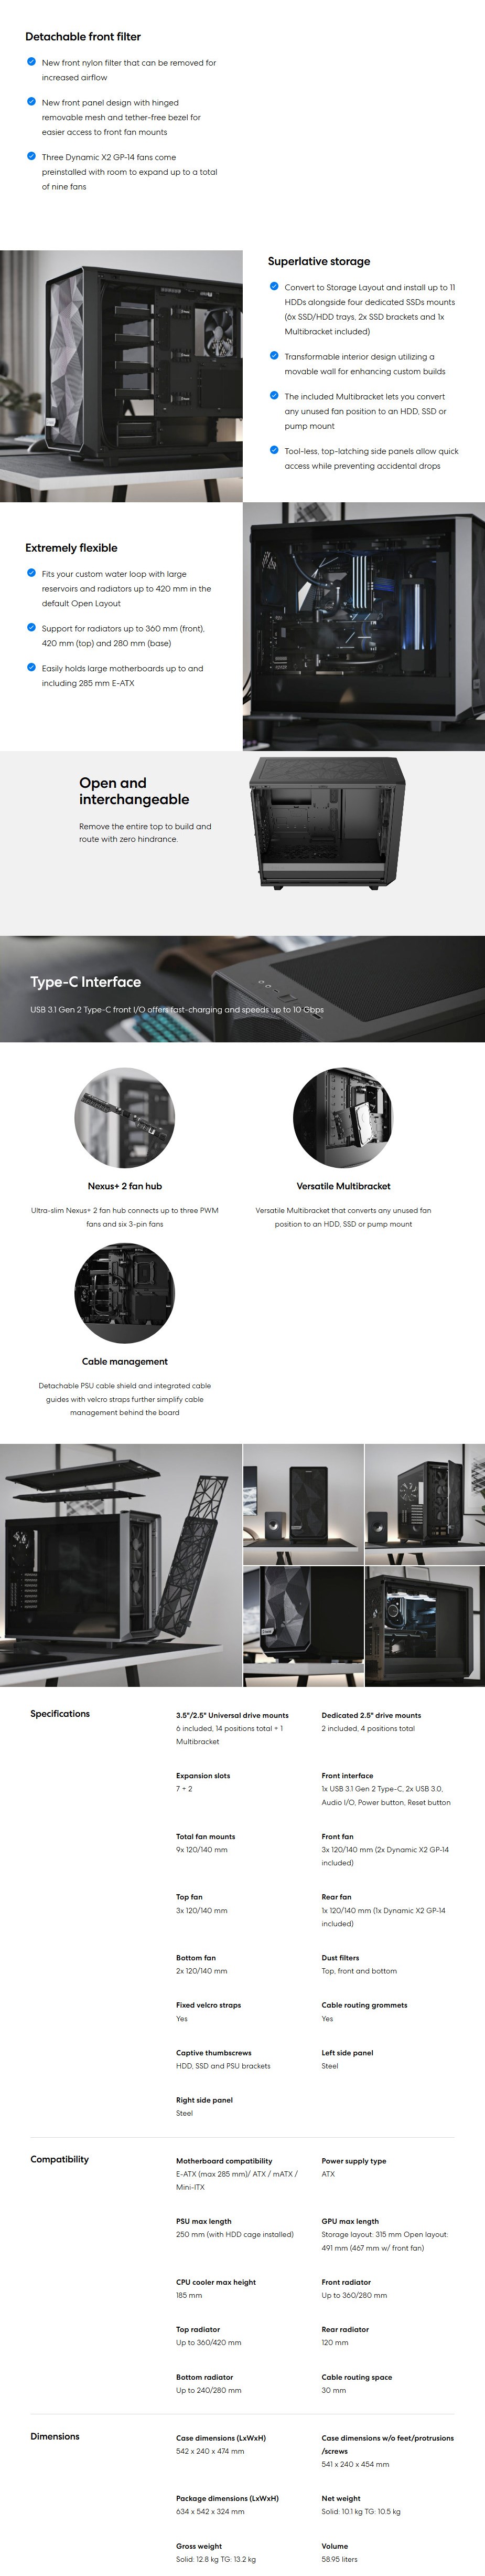 A large marketing image providing additional information about the product Fractal Design Meshify 2 Mid Tower Case - Black - Additional alt info not provided